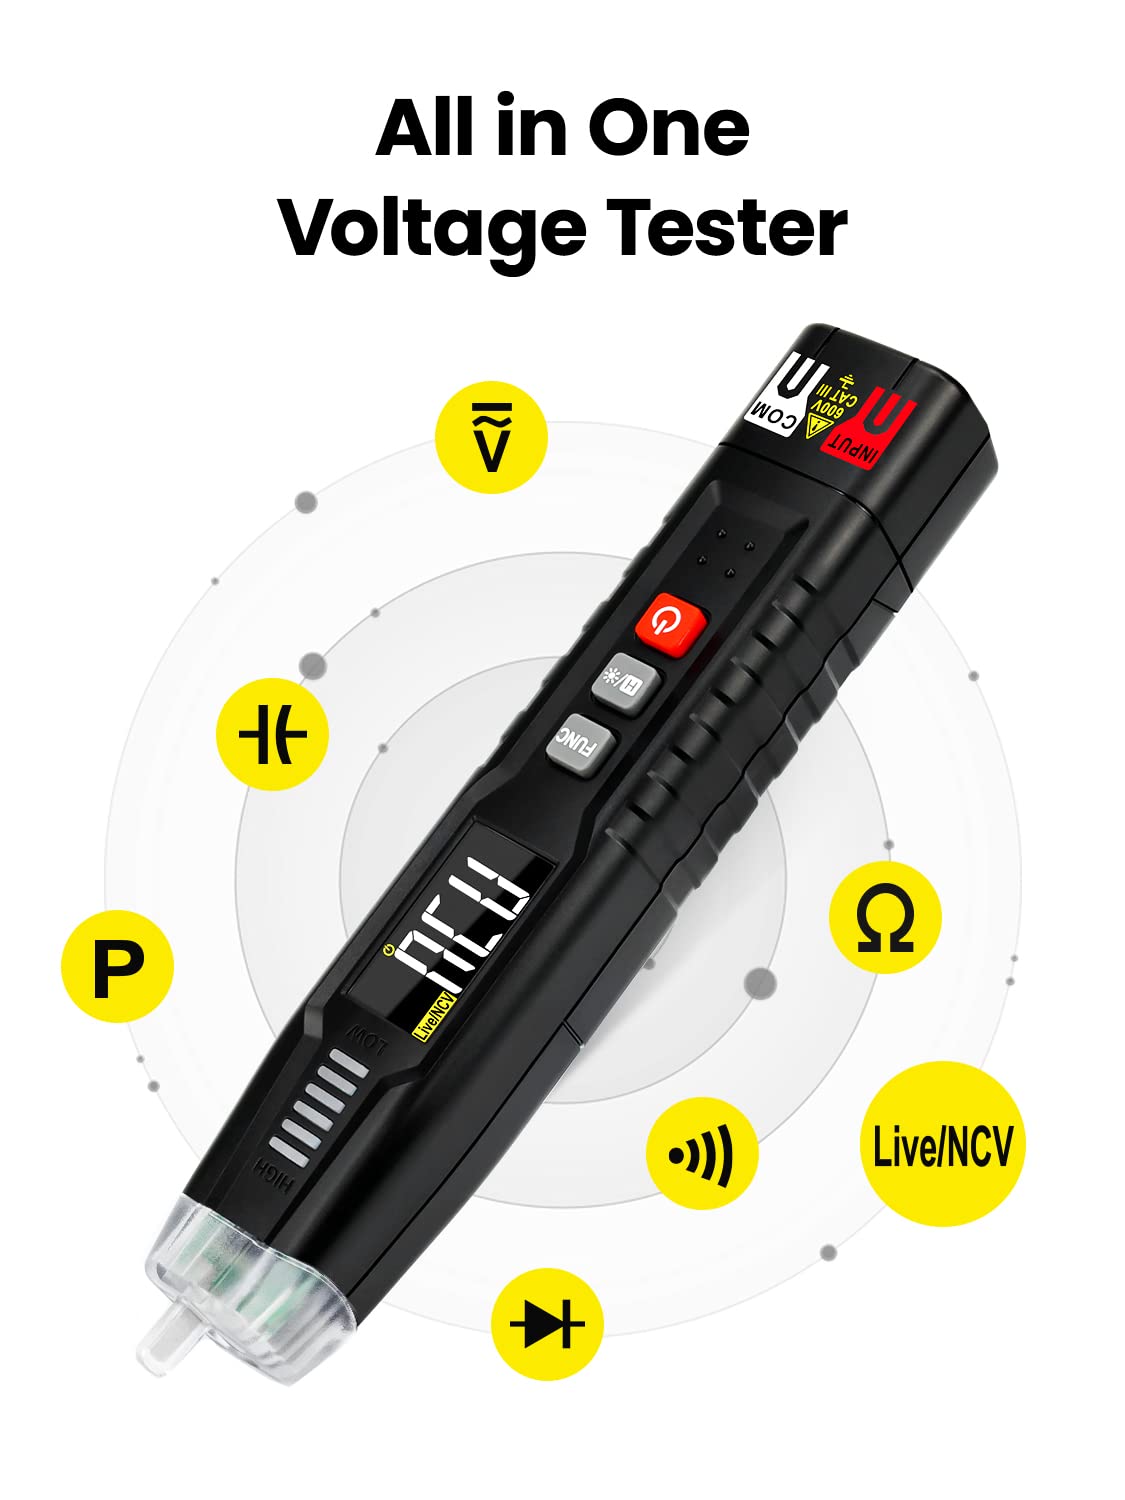 KAIWEETS Multifunction Non Contact Voltage Tester(ST100) and Outlet Tester(KM117B), Home Electricity Problem Checker